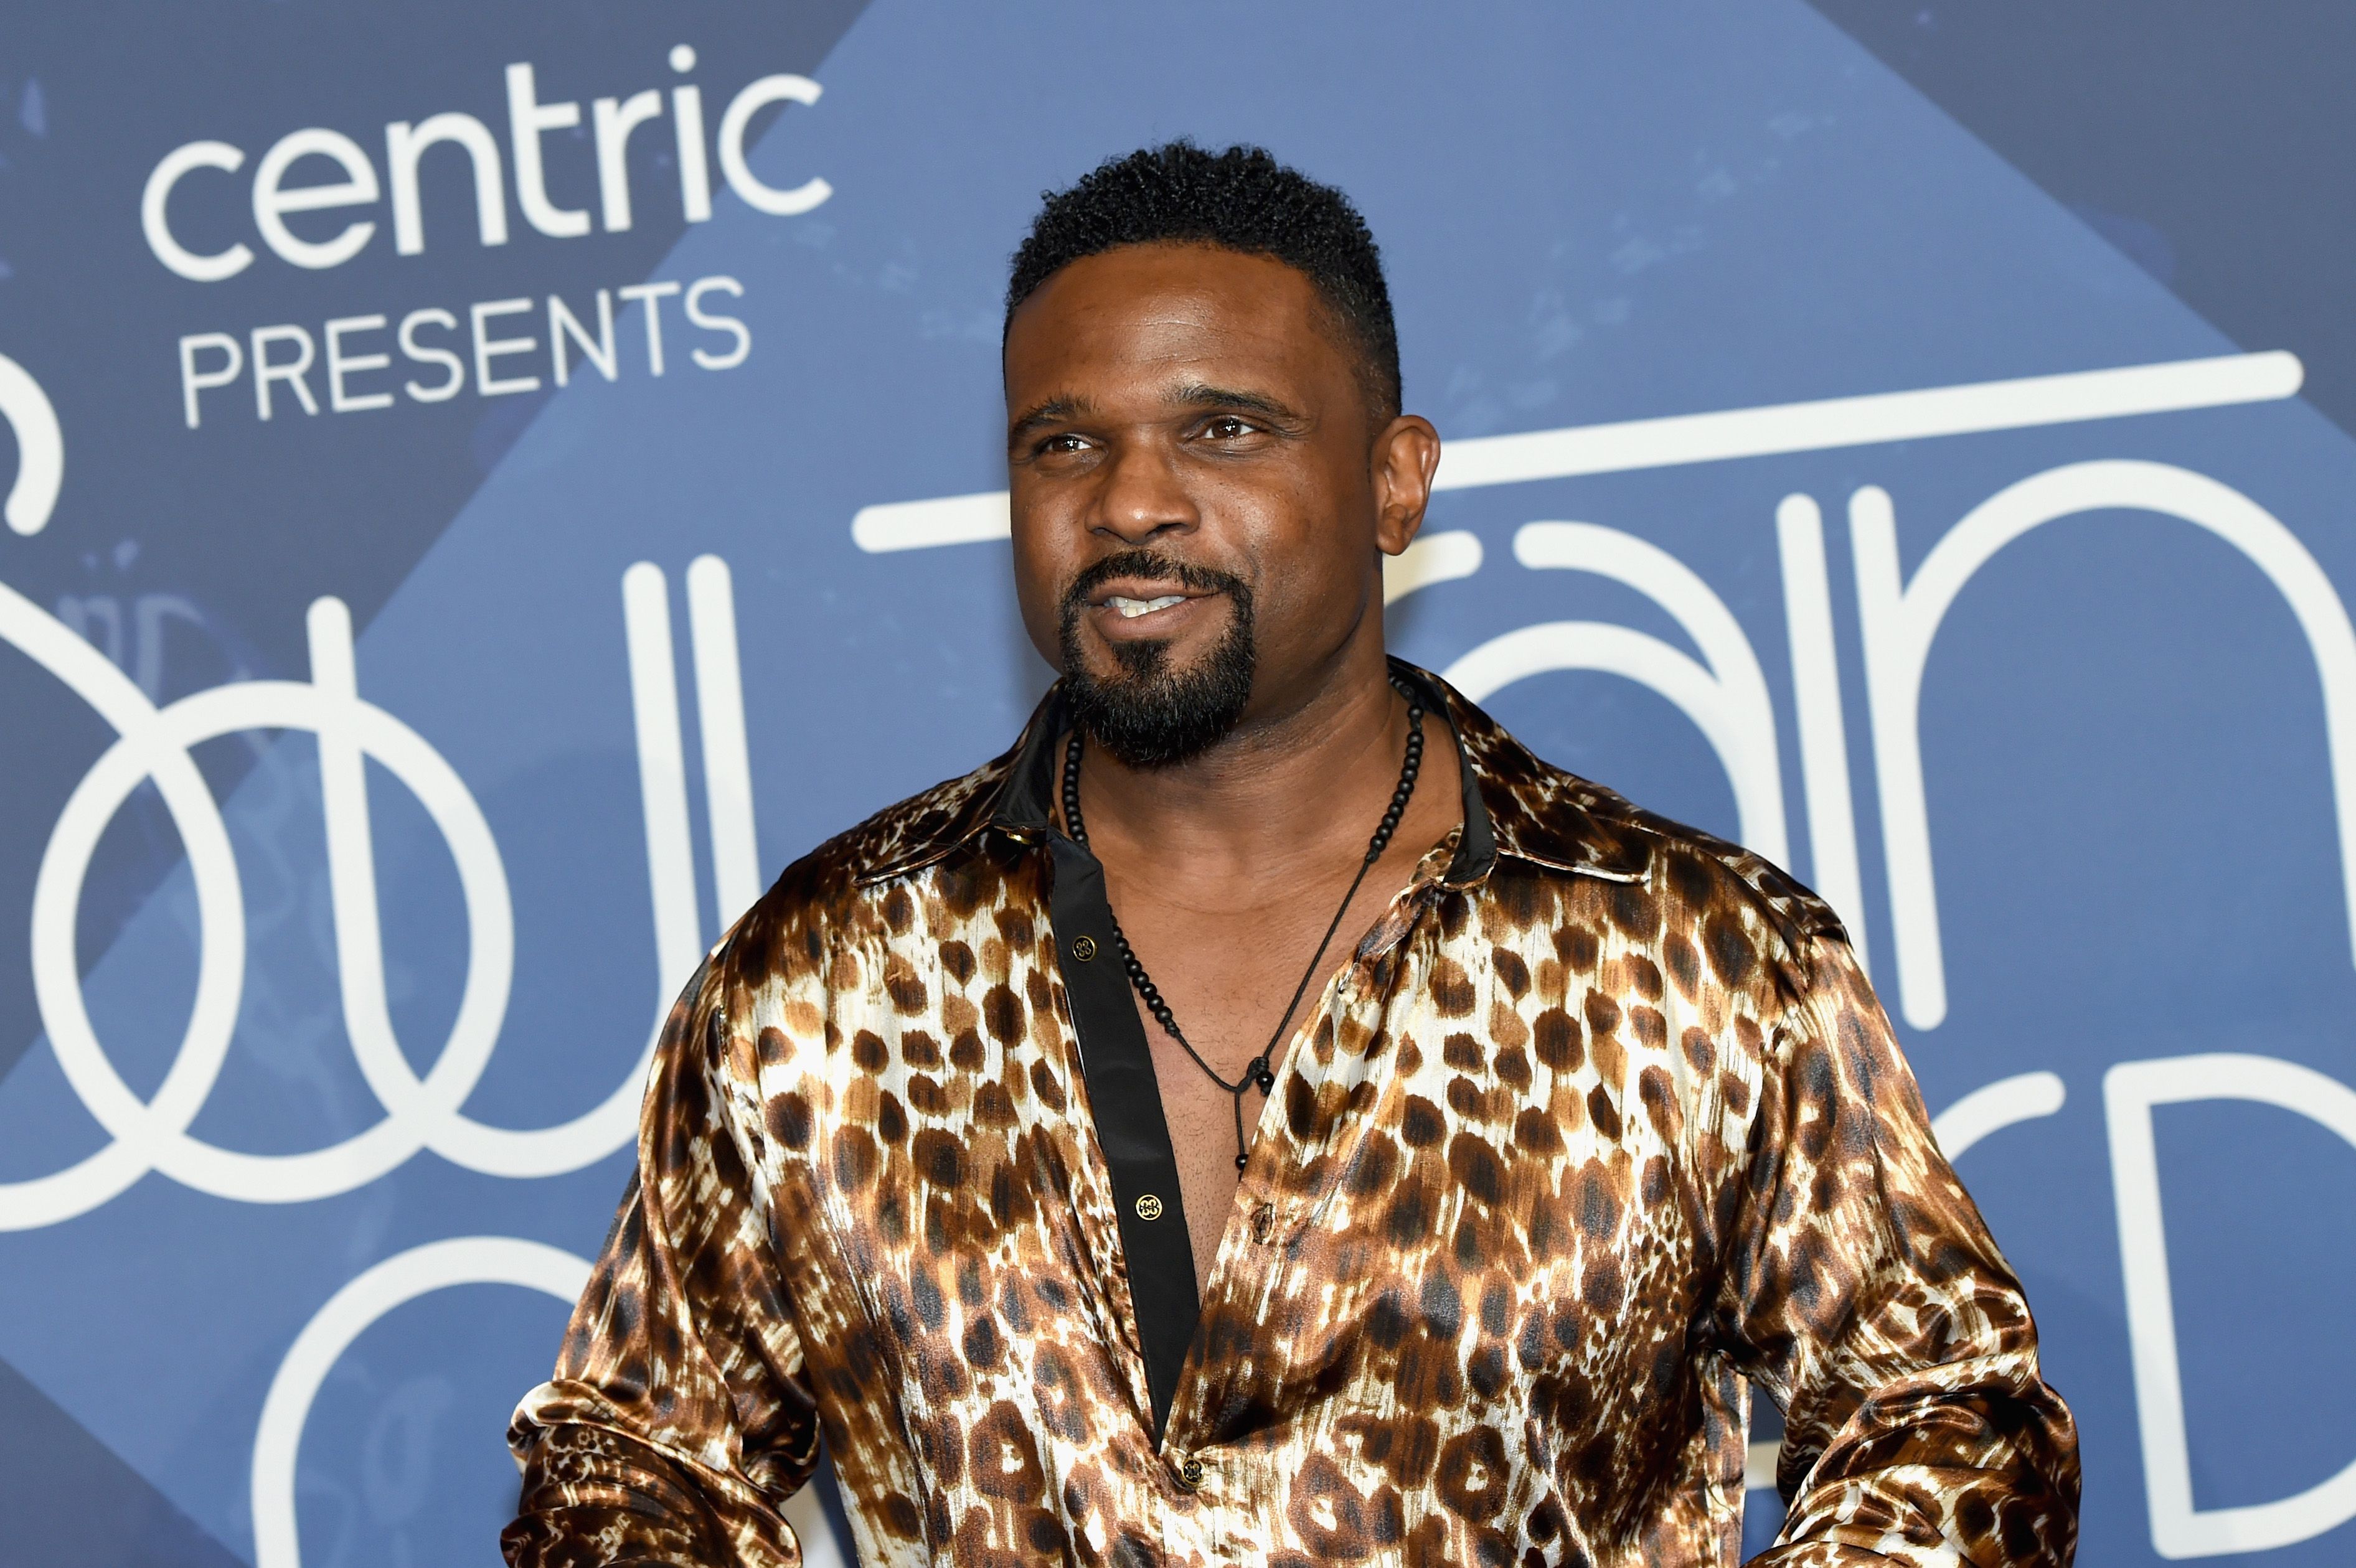  Darius McCrary at the 2016 Soul Train Music Awards in Las Vegas, Nevada | Source: Getty Images